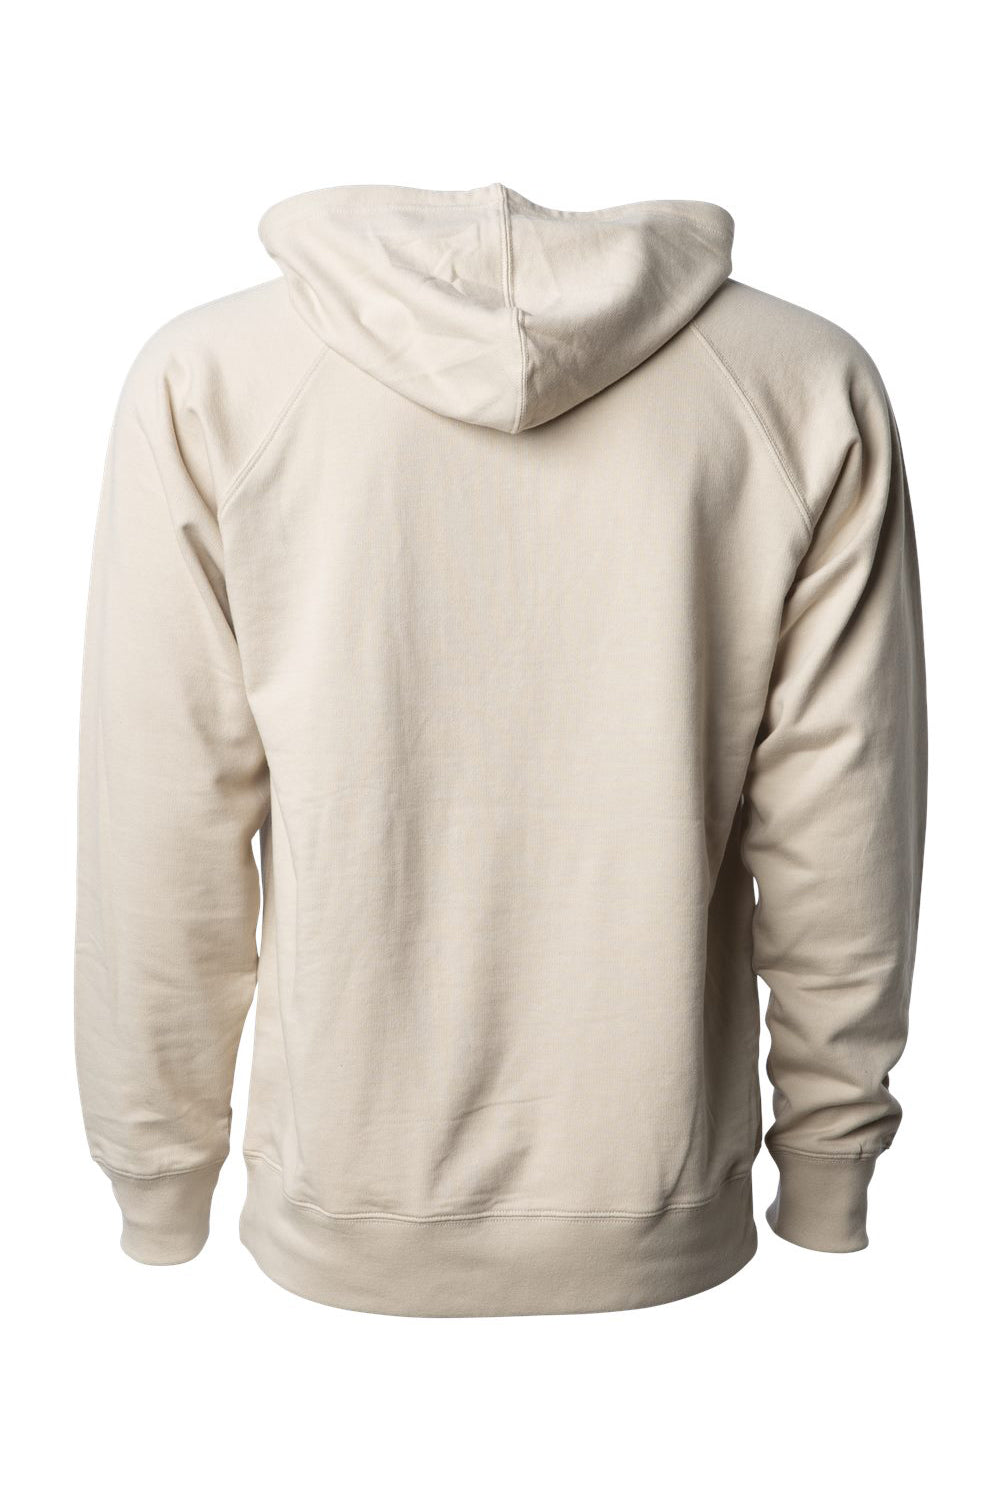 Independent Trading Co. SS1000 Mens Icon Loopback Terry Hooded Sweatshirt Hoodie Sand Flat Back